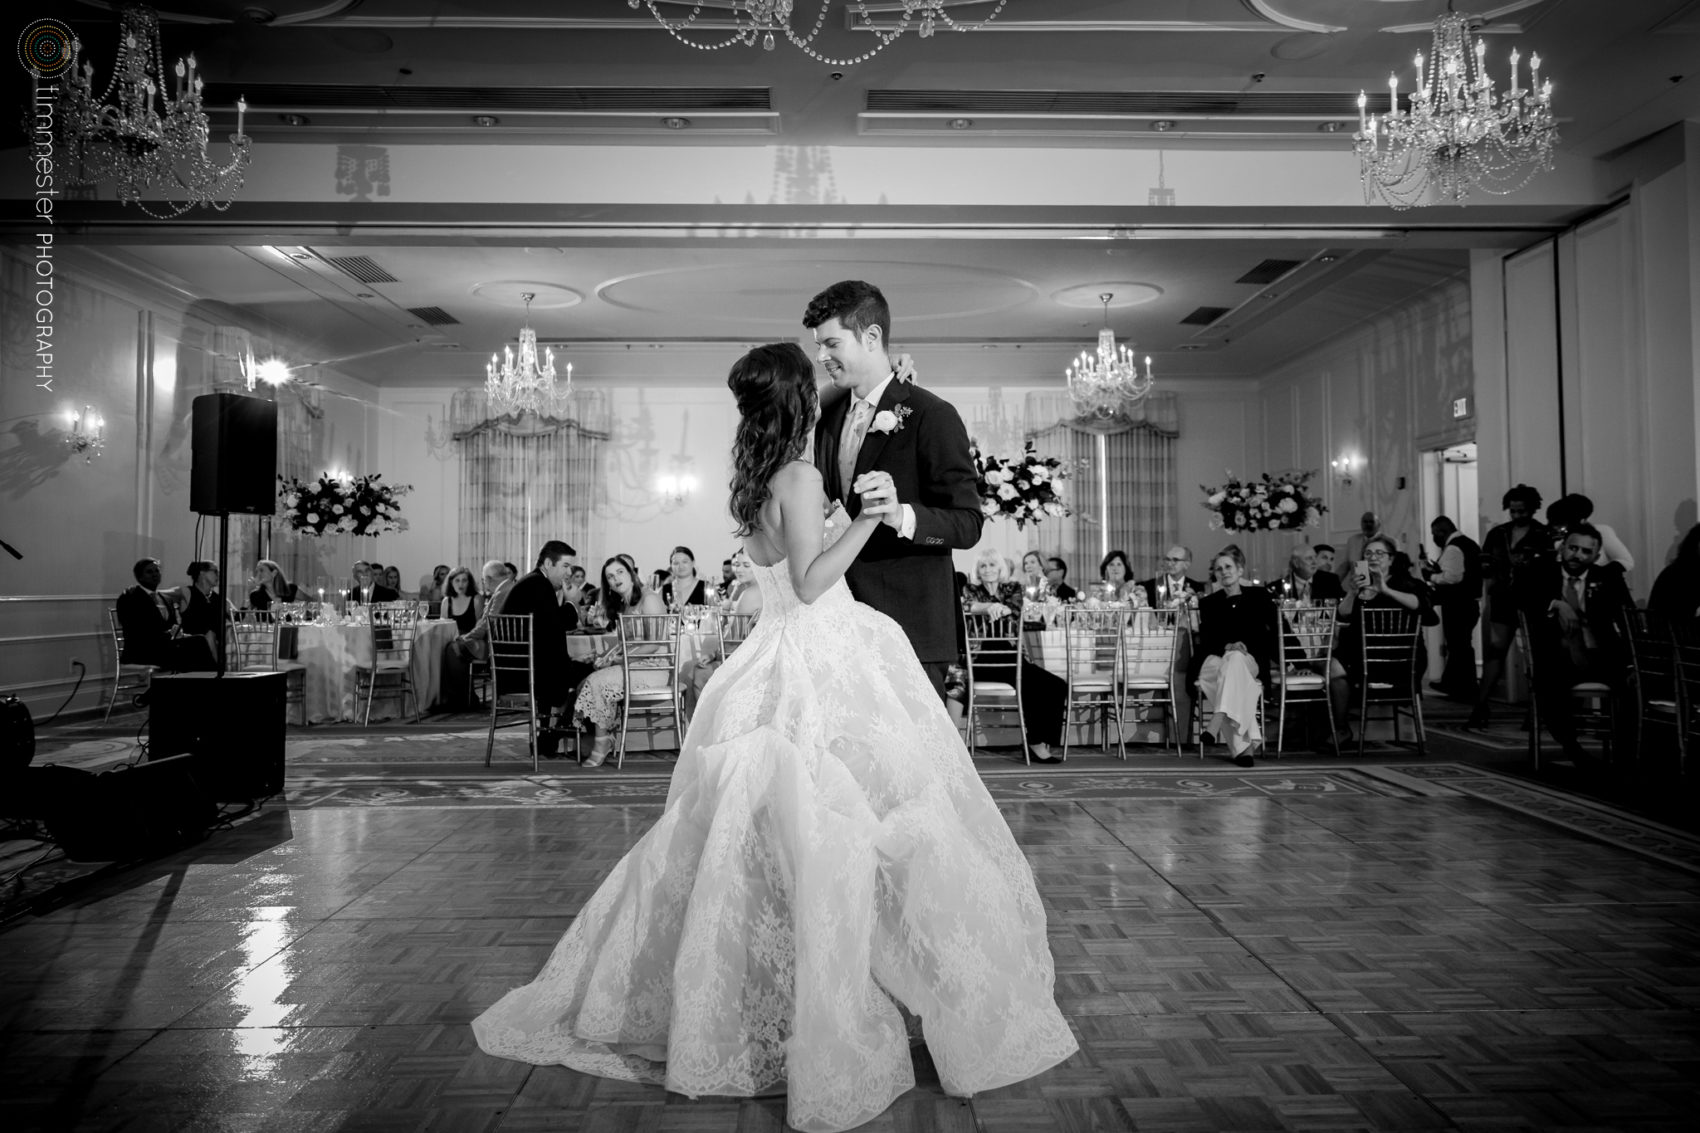 A bride and groom's first dance on their wedding day at The Carolina Inn in NC.